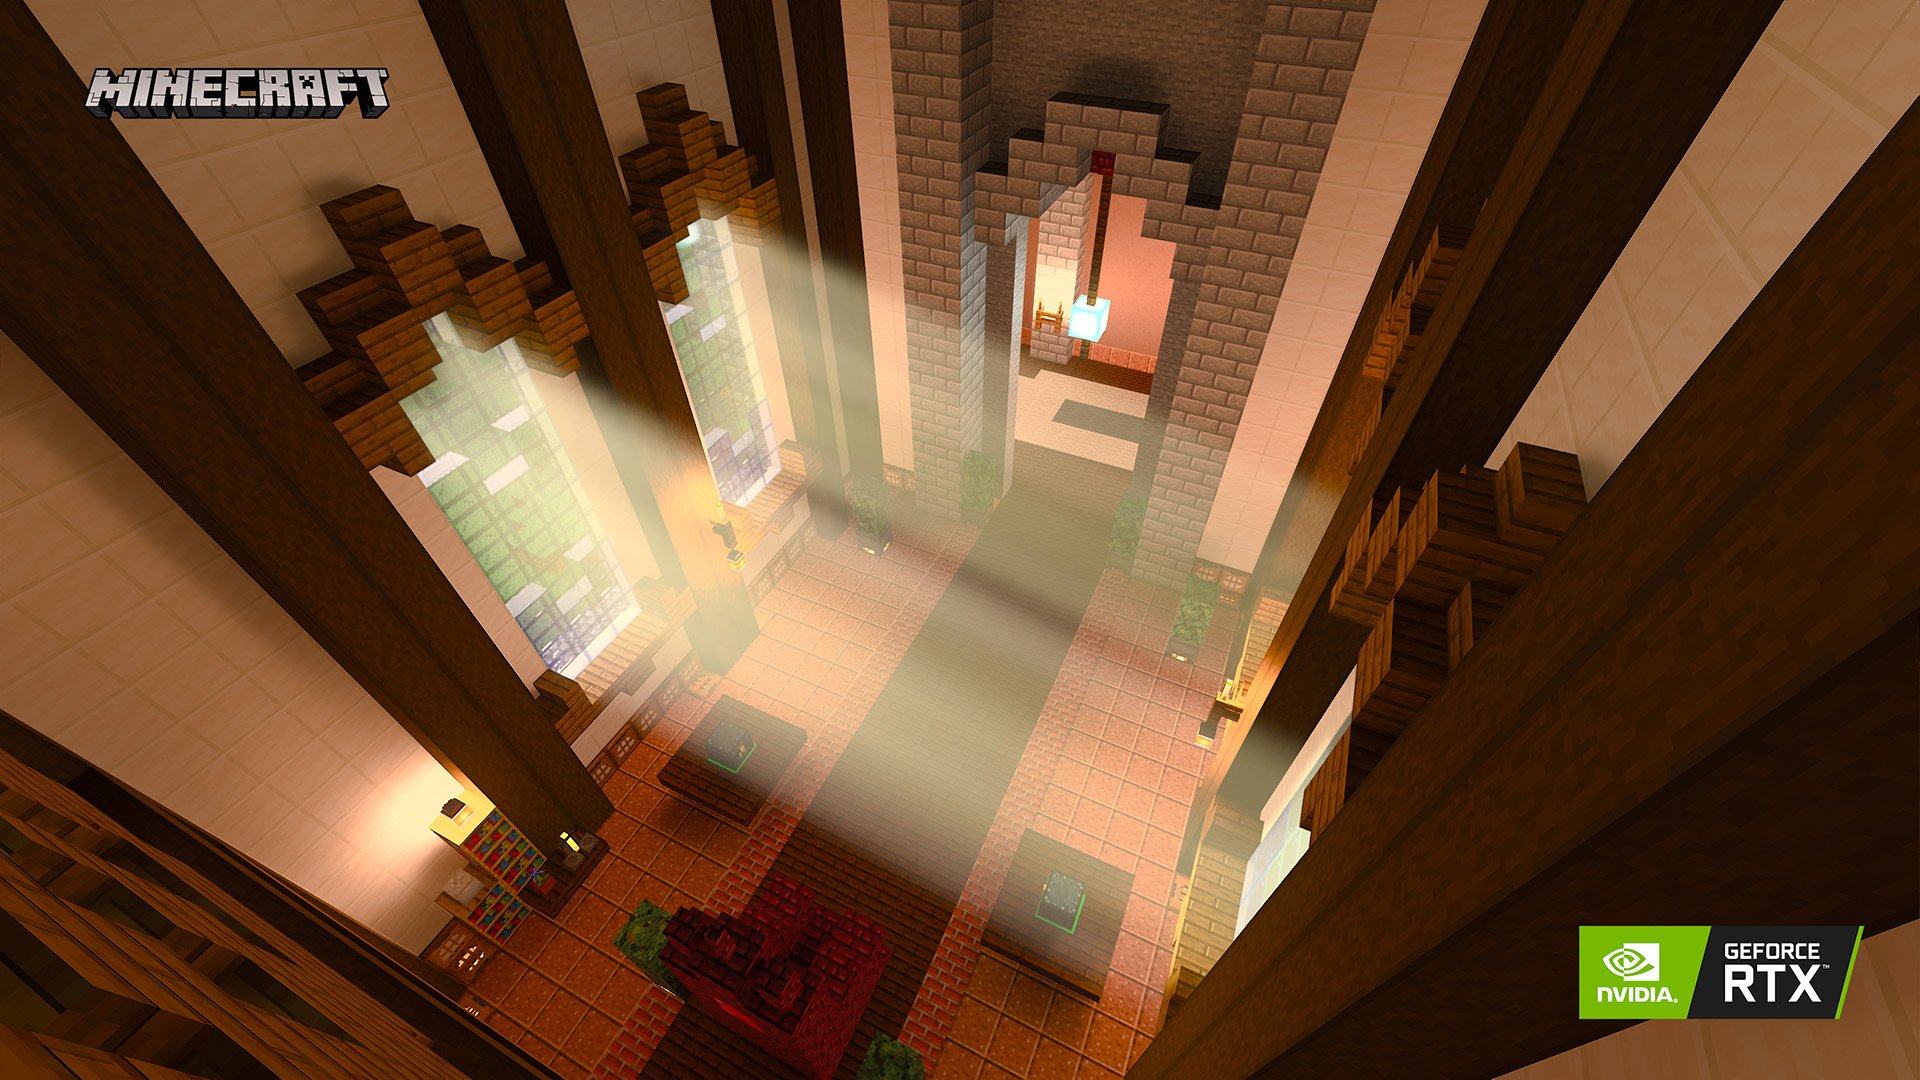 How to Enable Ray Tracing in Minecraft